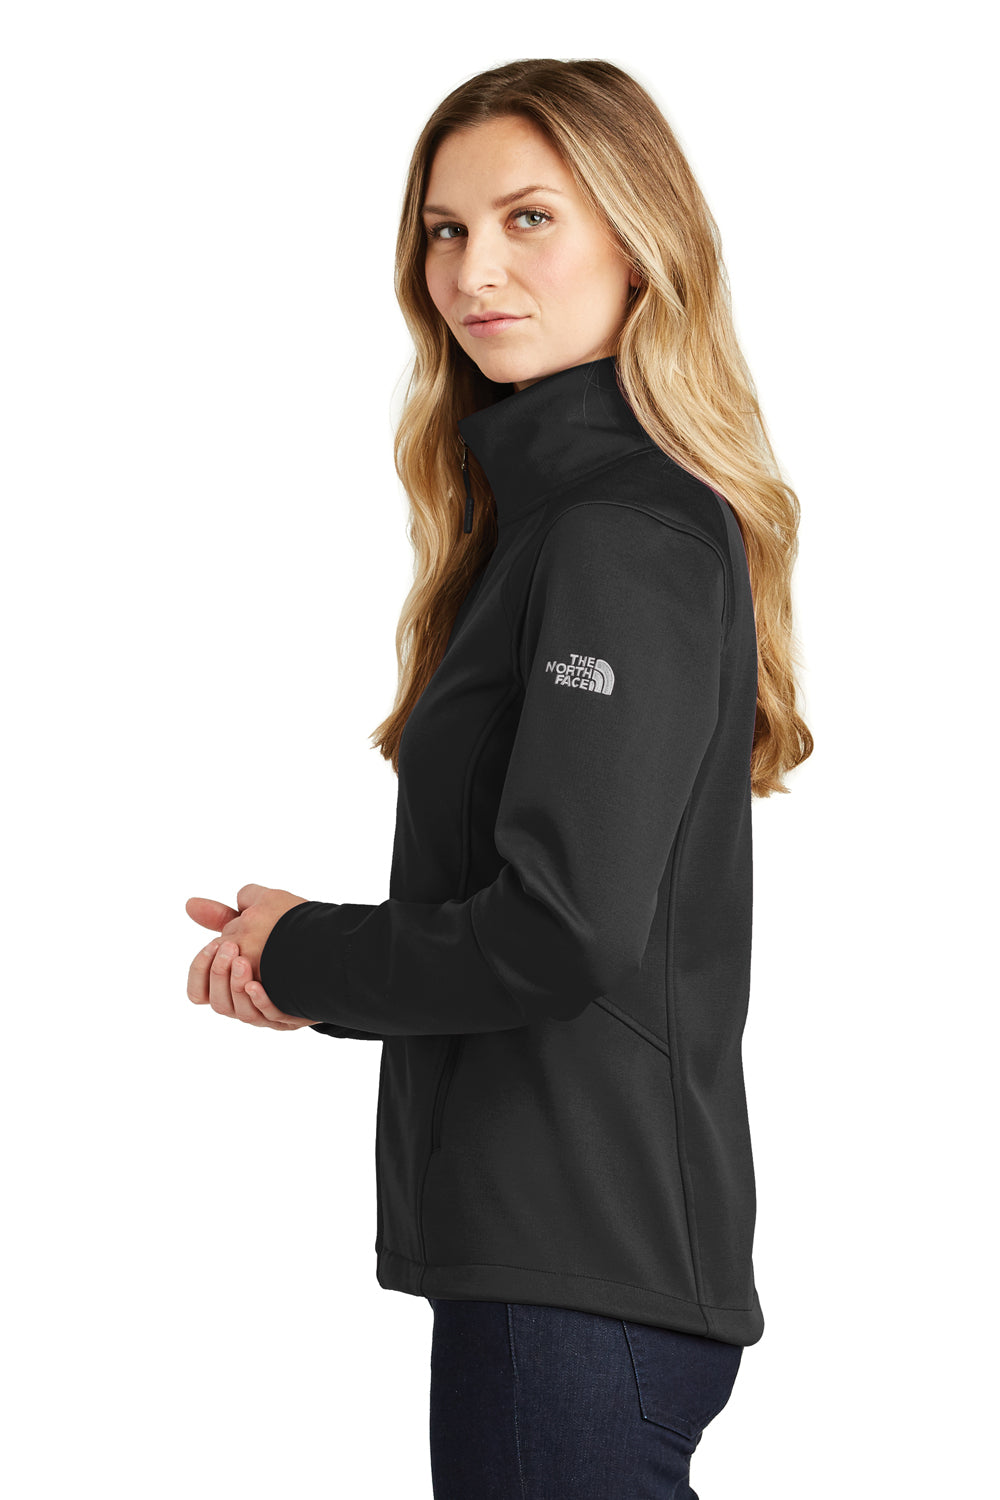 The North Face NF0A3LGY Womens Ridgeline Wind & Water Resistant Full Zip Jacket Black Side